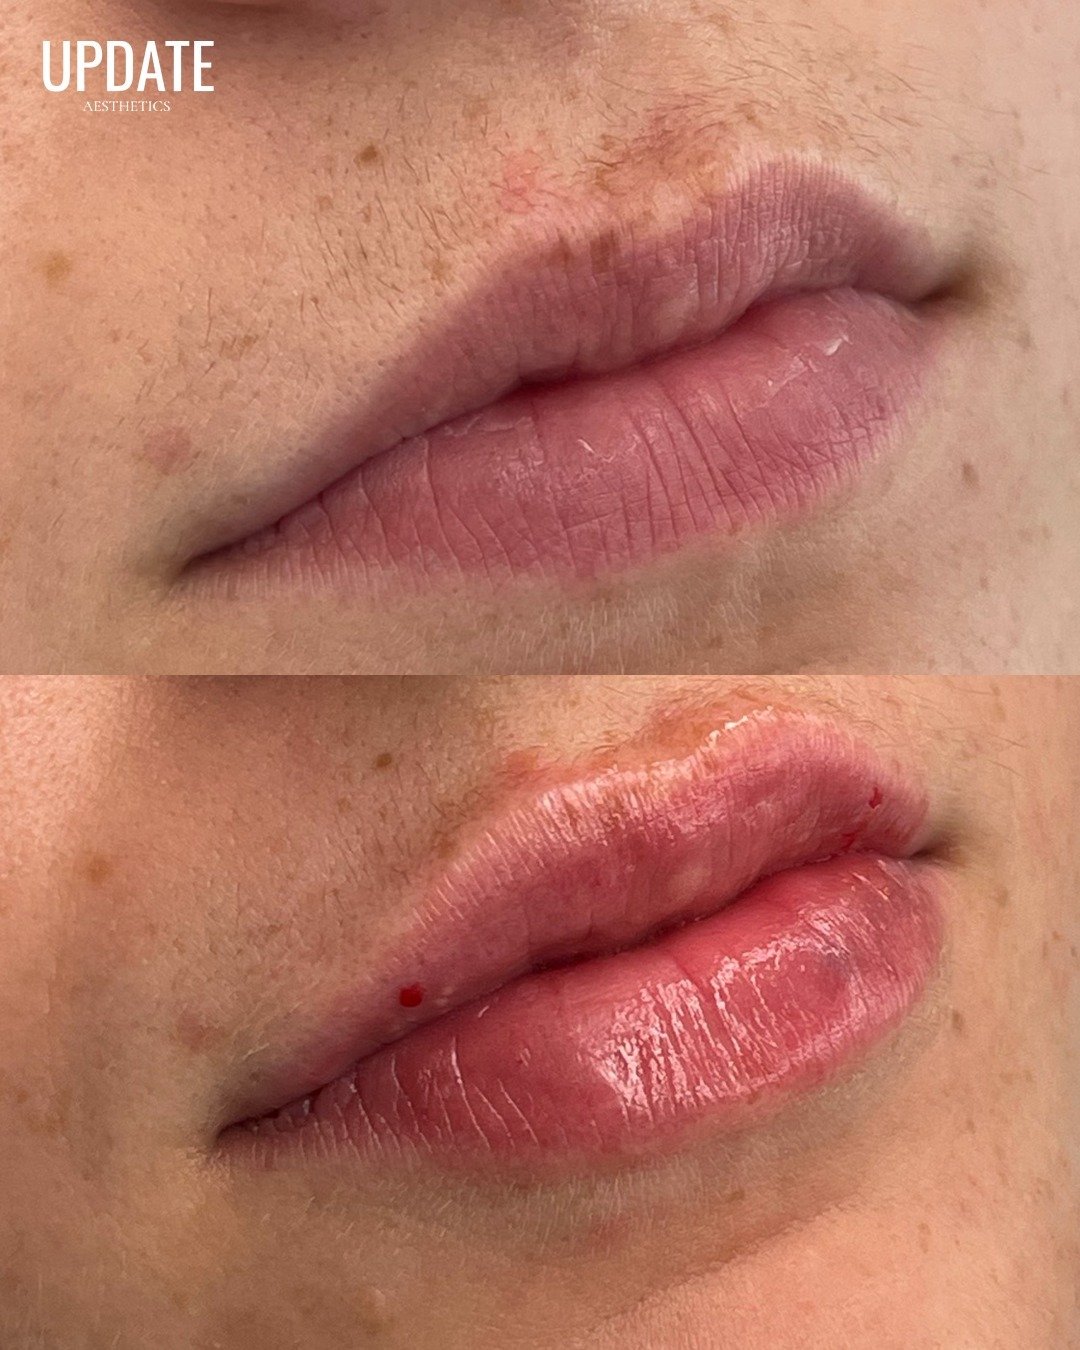 Sometimes, it only takes a small change to make a big difference, especially when it comes to lip filler. 💋 ⁠
⁠
With just a subtle enhancement, Nina can create fuller, more balanced lips that beautifully complement your natural features. ⁠
⁠
Book yo